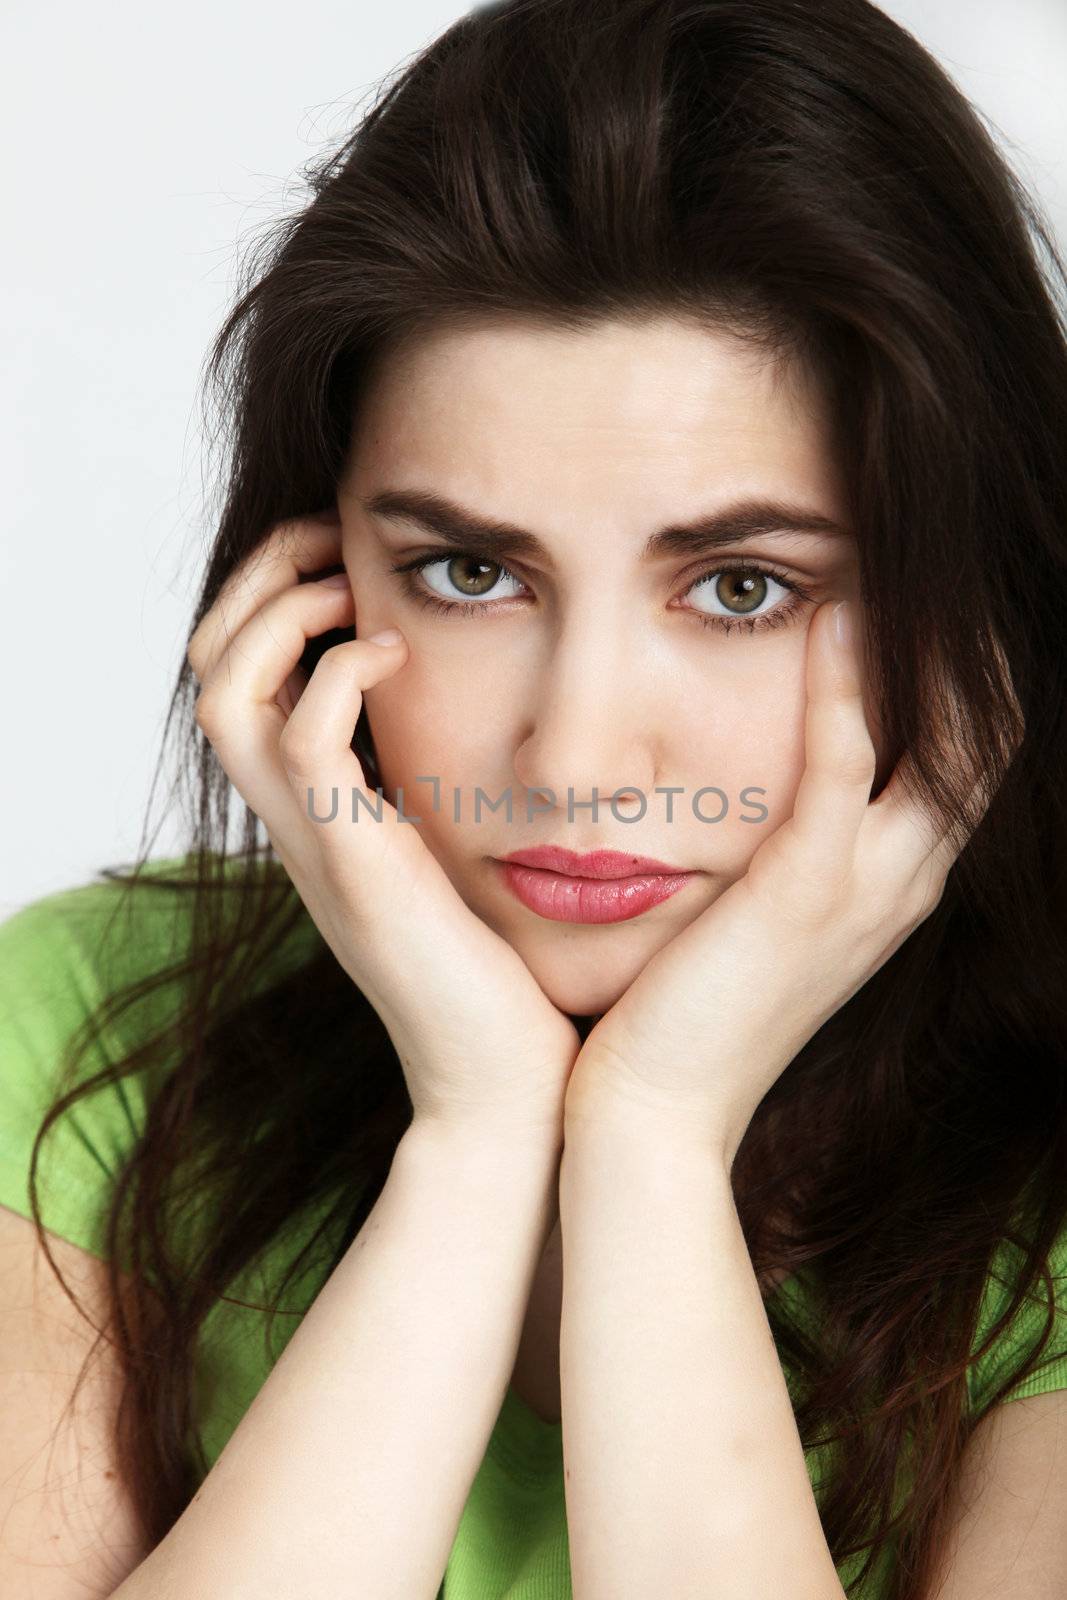 Sad woman holding her cheeks with both hands